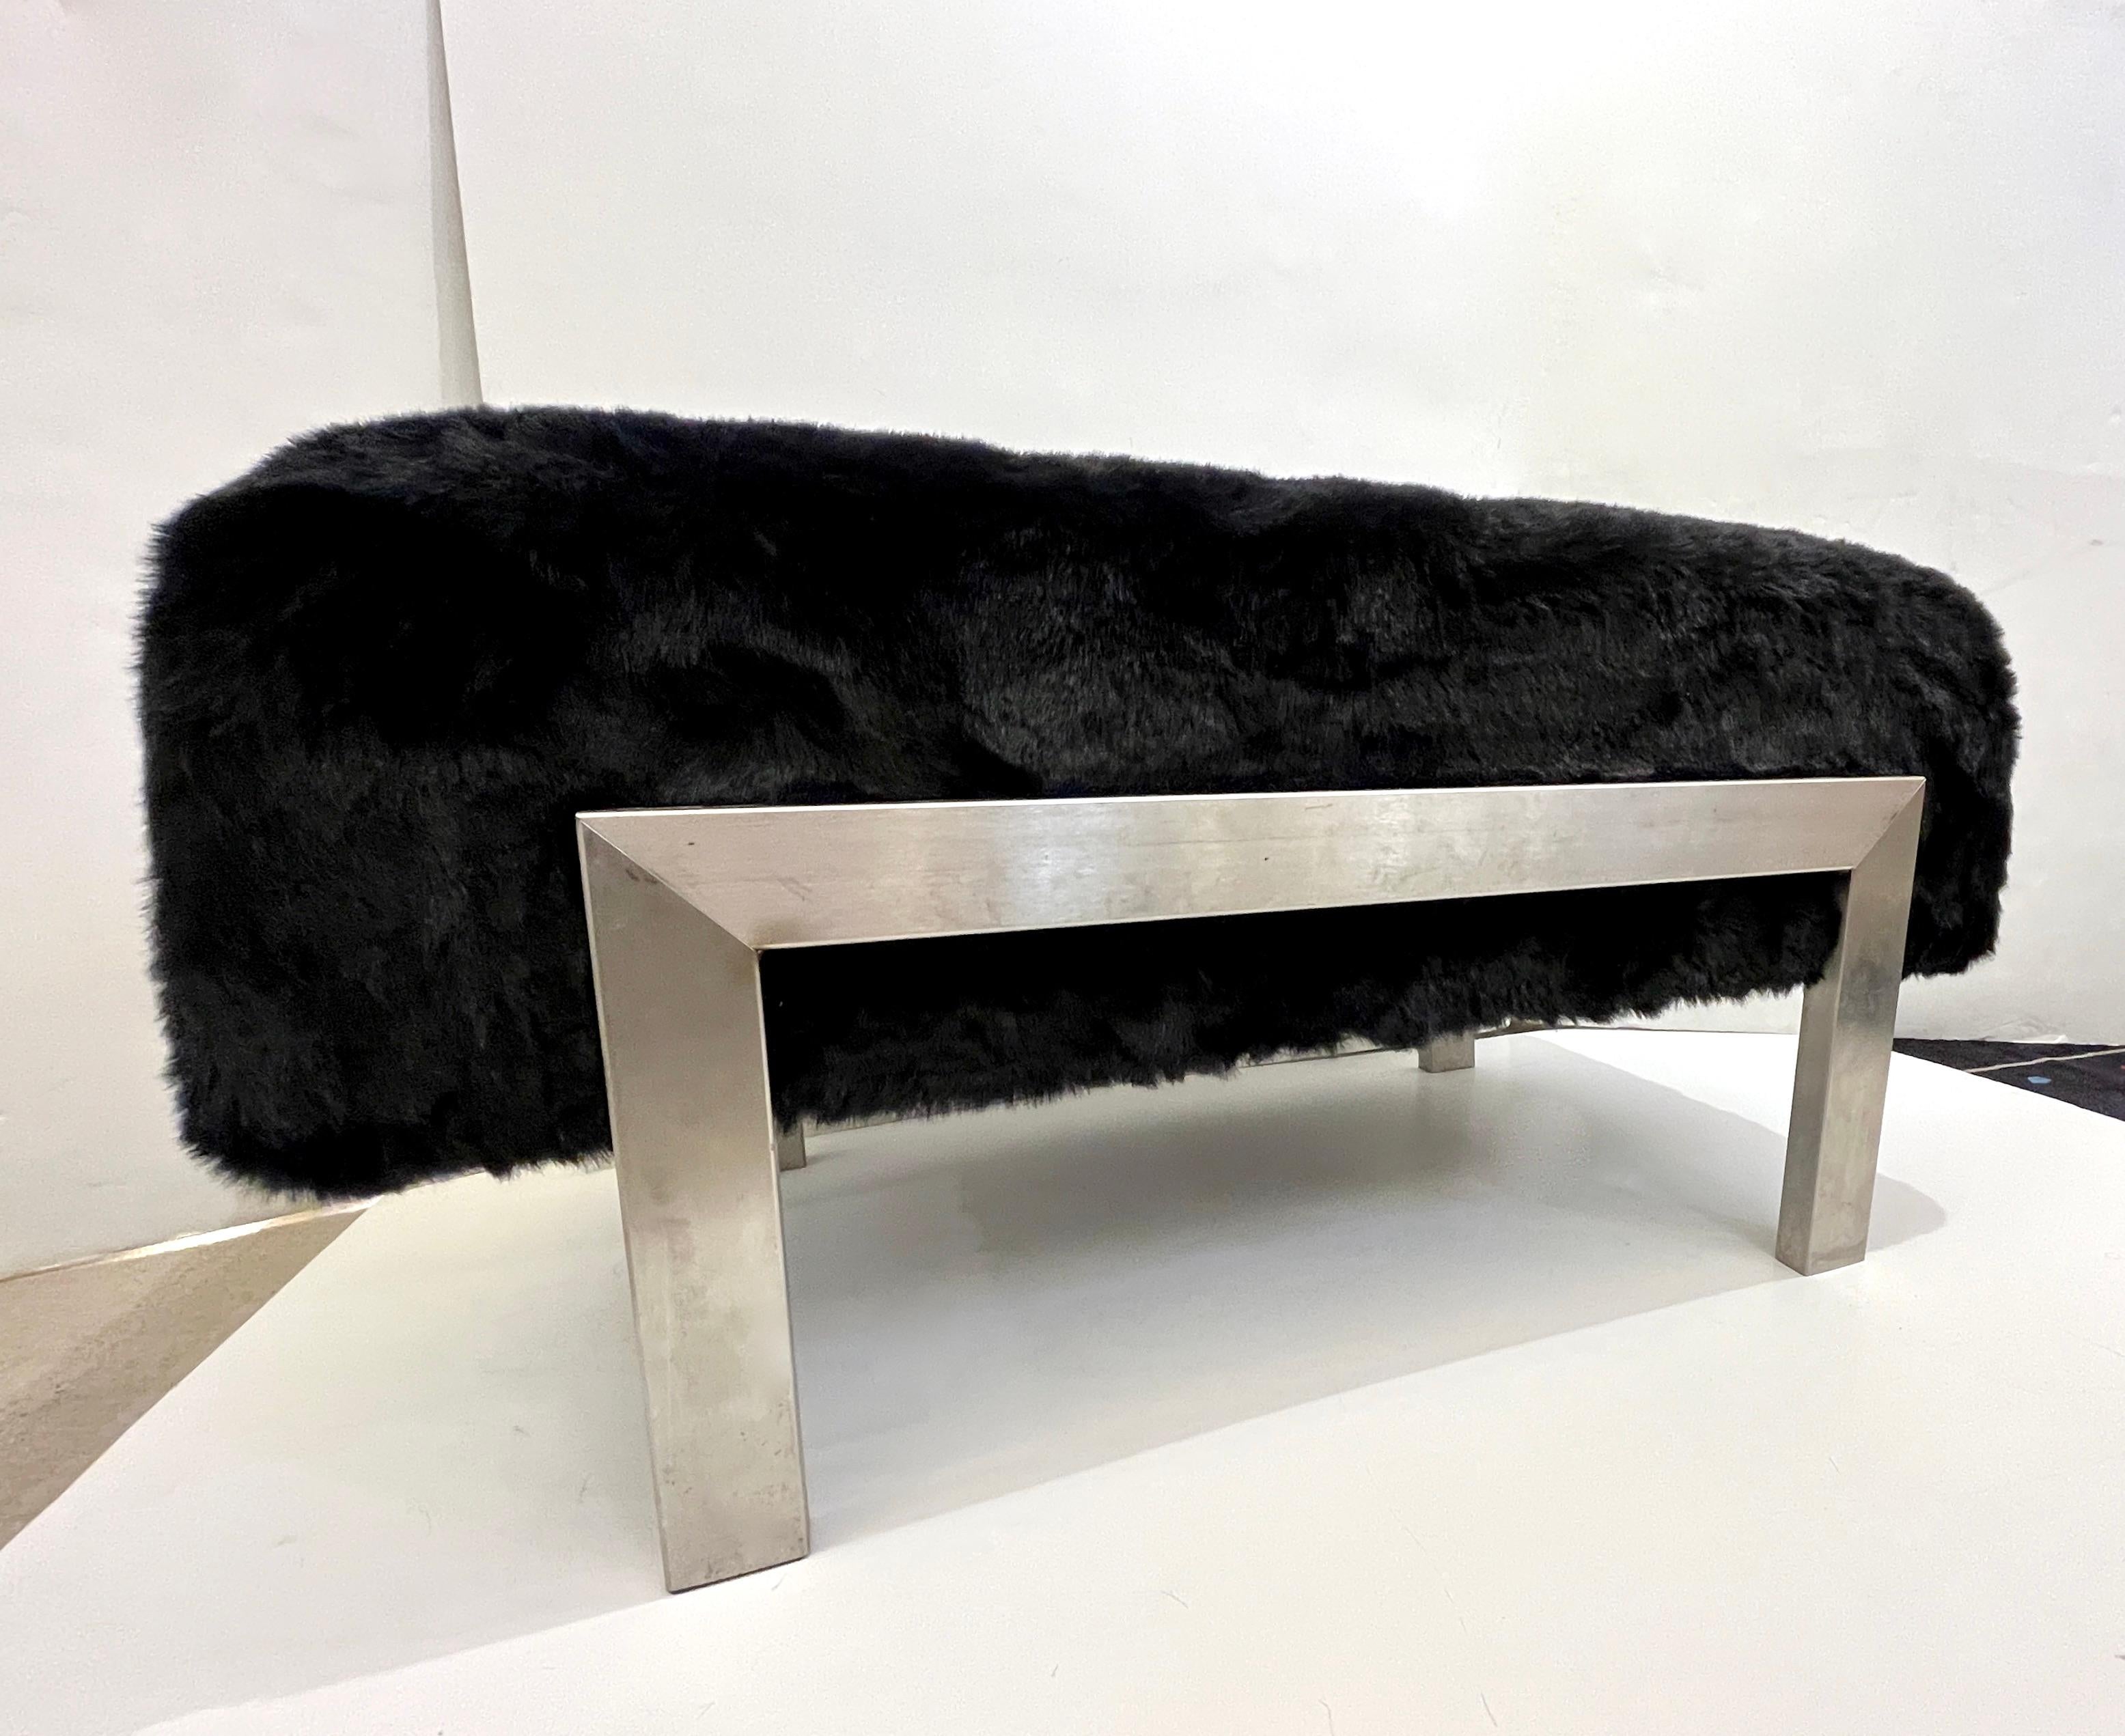 1970s Italian Vintage Black Faux Fur Steel Bed Stool Bench - 1 Pair available For Sale 5